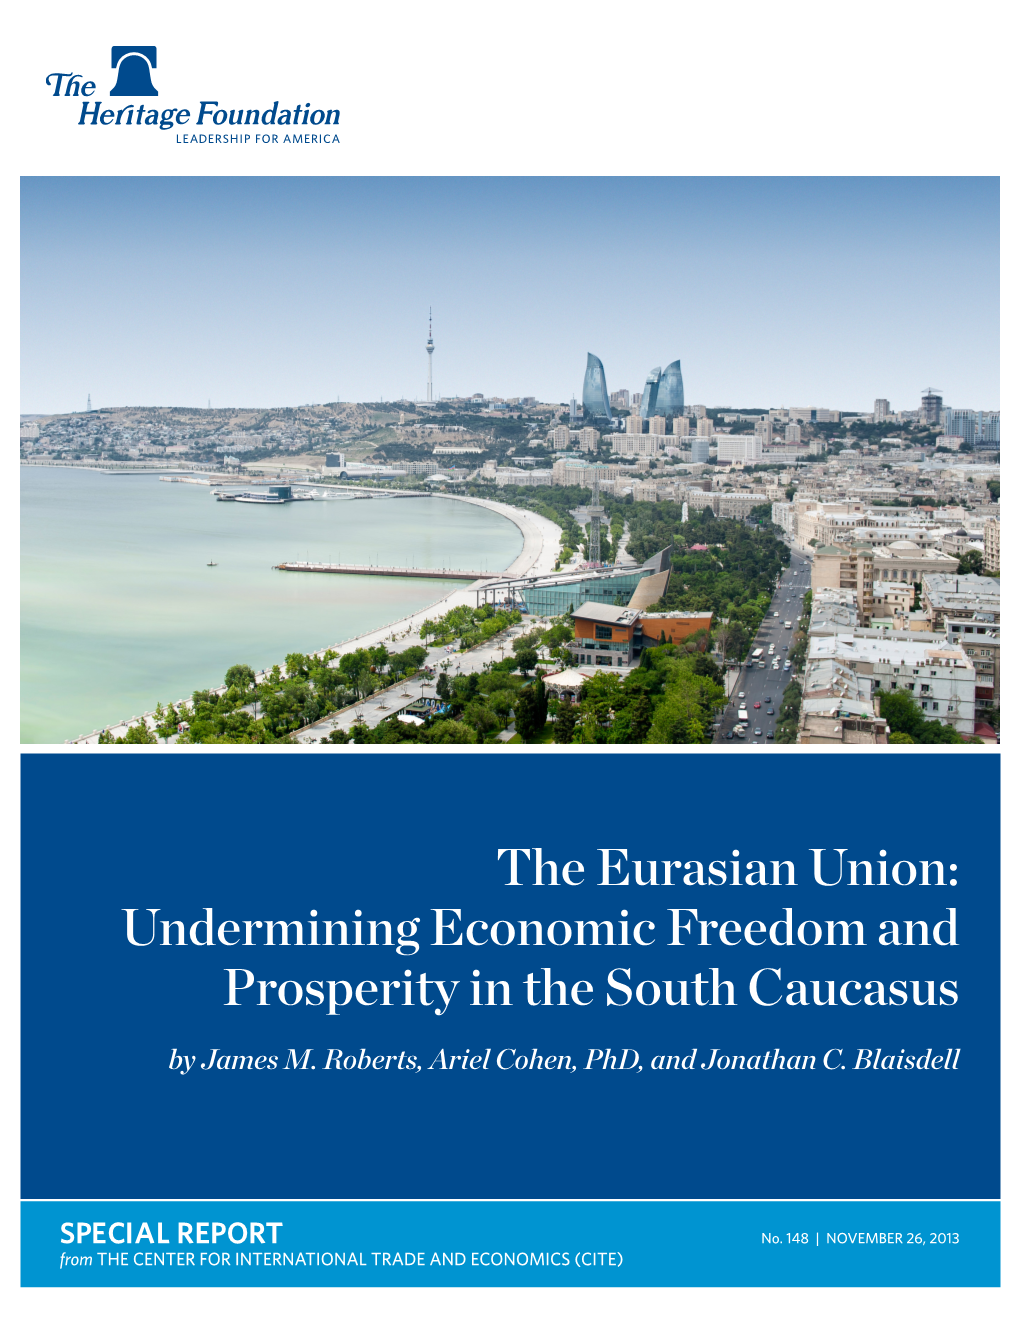 Eurasian Union: Undermining Economic Freedom and Prosperity in the South Caucasus